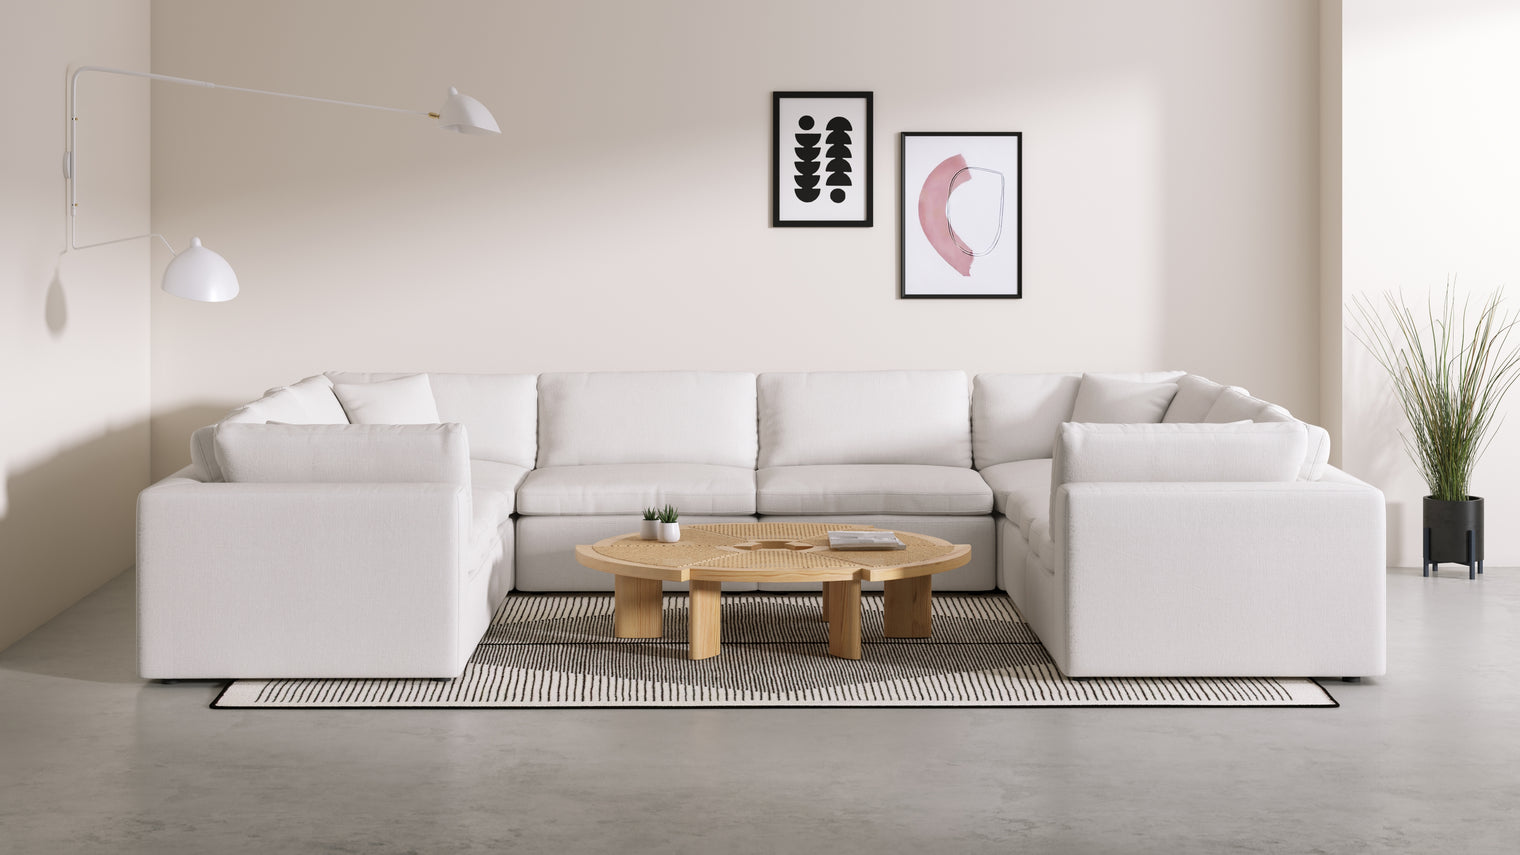 TAILORED AESTHETIC | Whether your style leans towards contemporary, traditional, or eclectic, the Sky Sofa effortlessly adapts to design preferences. Its neutral color palette serves as a canvas for creativity, allowing for accessorizing with bold accent pillows, throws, or statement coffee tables to make it truly unique.
